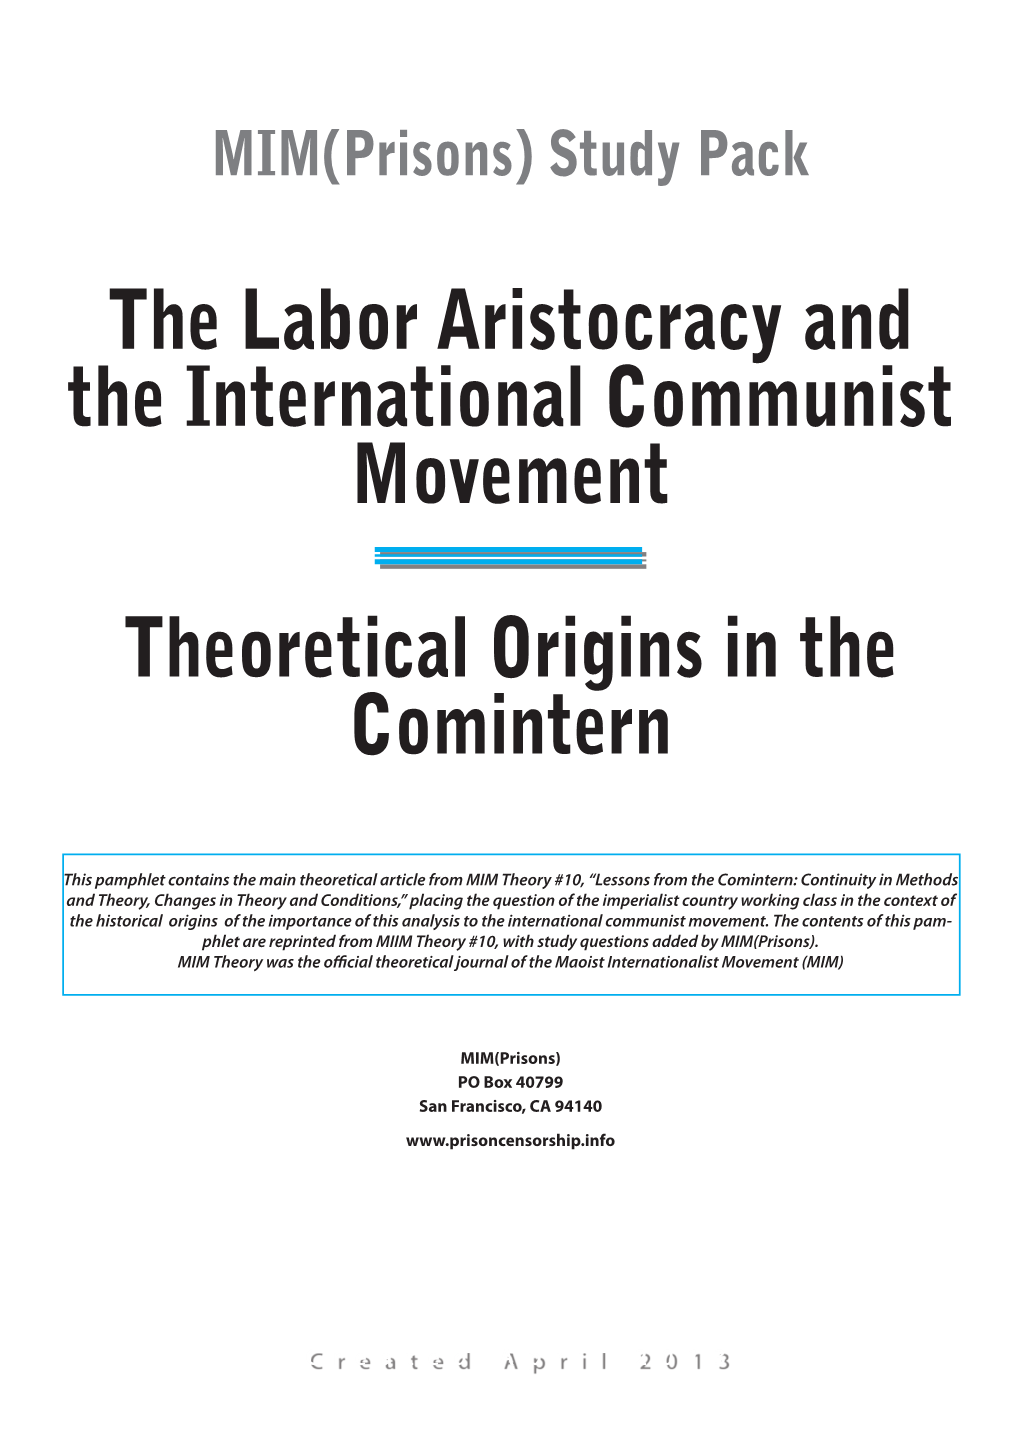 The Labor Aristocracy and the International Communist Movement